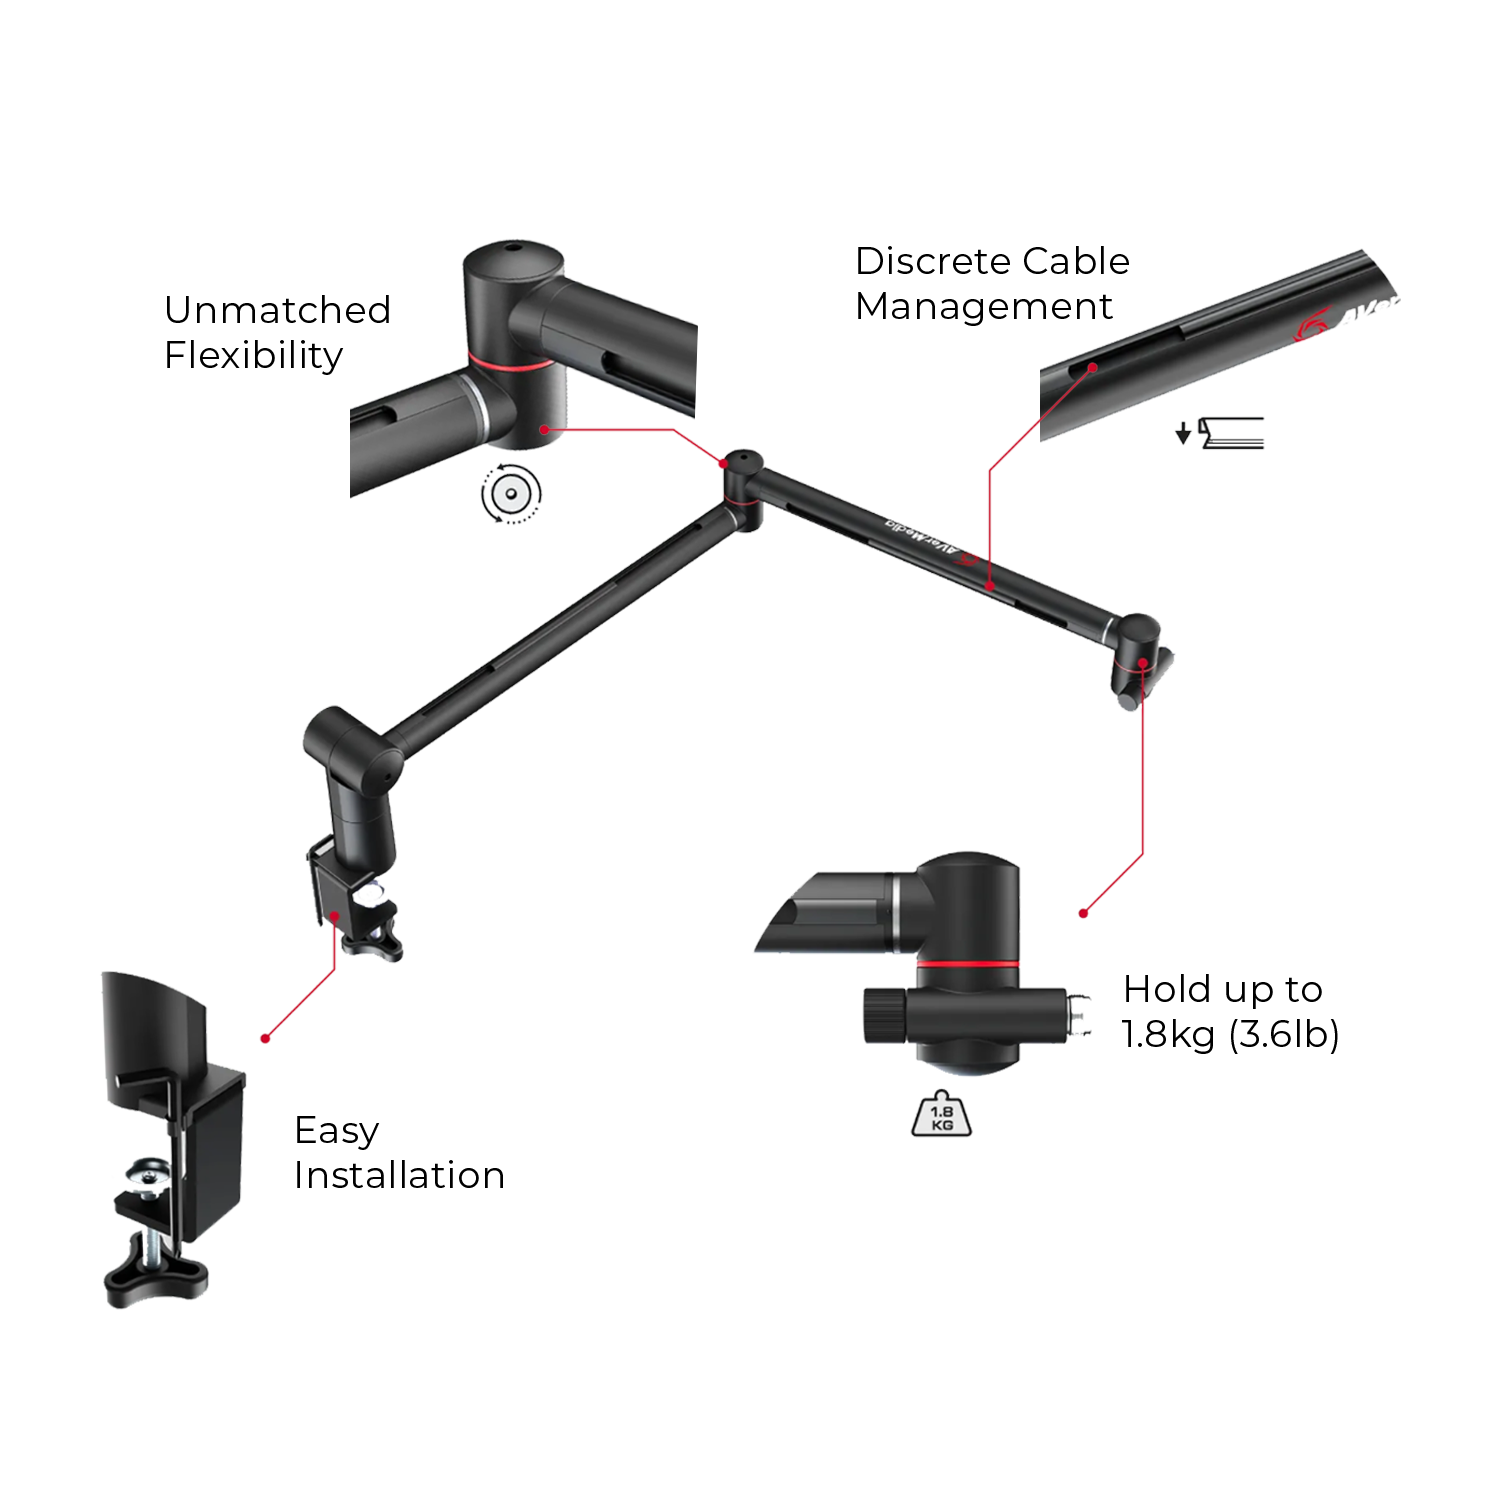 BA311 Adjustable Microphone Boom Arm with rotating joints for horizontal and vertical angles